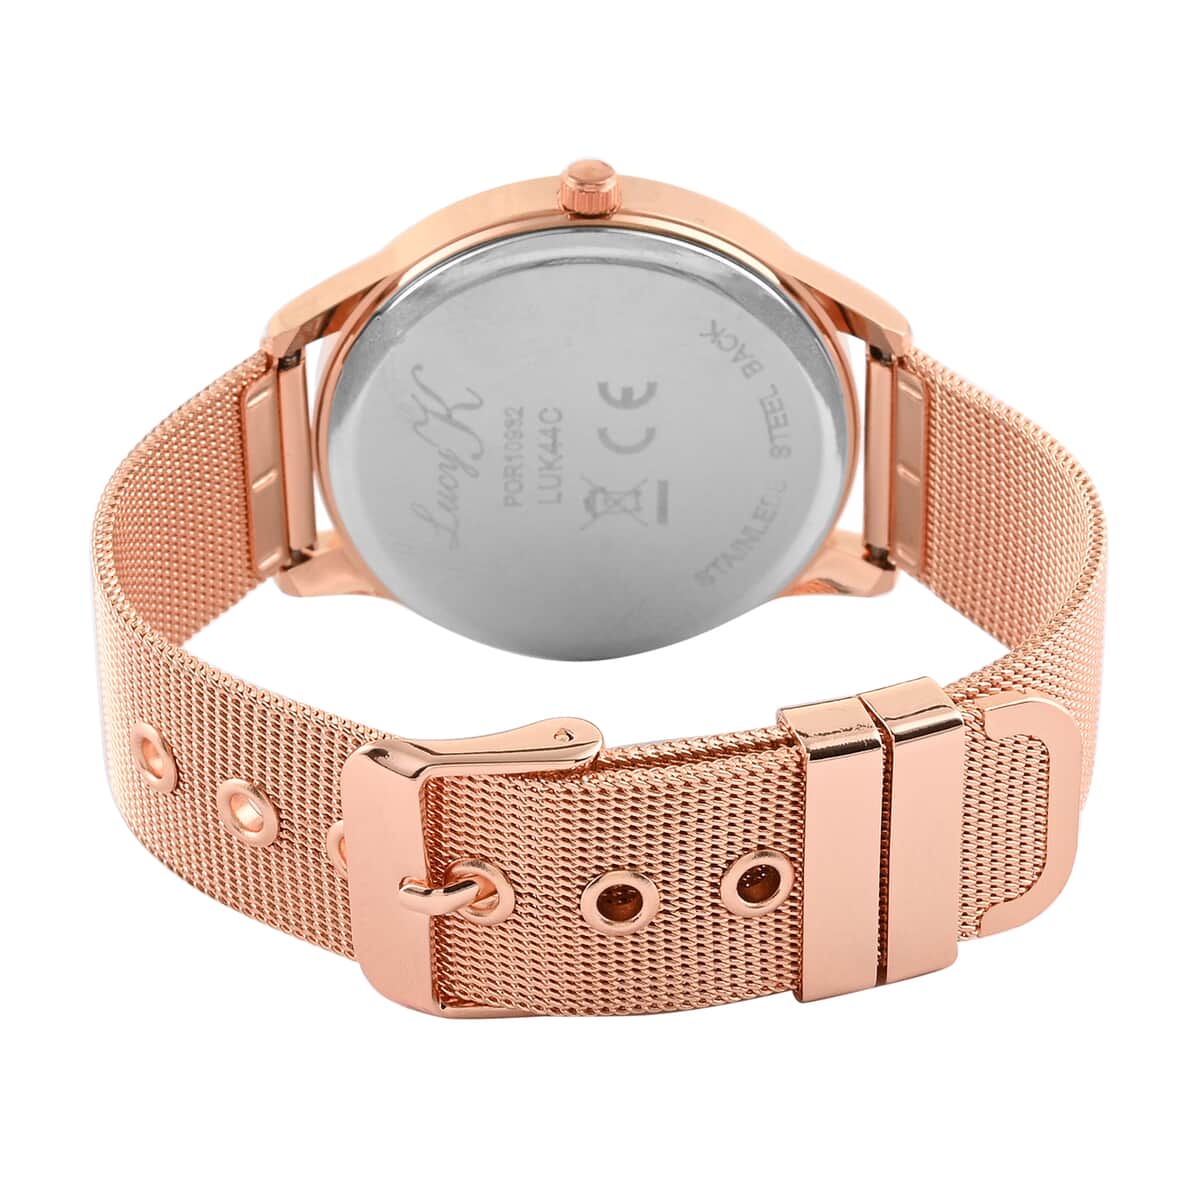 LUCY K Japanese Movement Watch with Sunray Dial and ION Plated RG Stainless Steel Mesh Strap image number 4